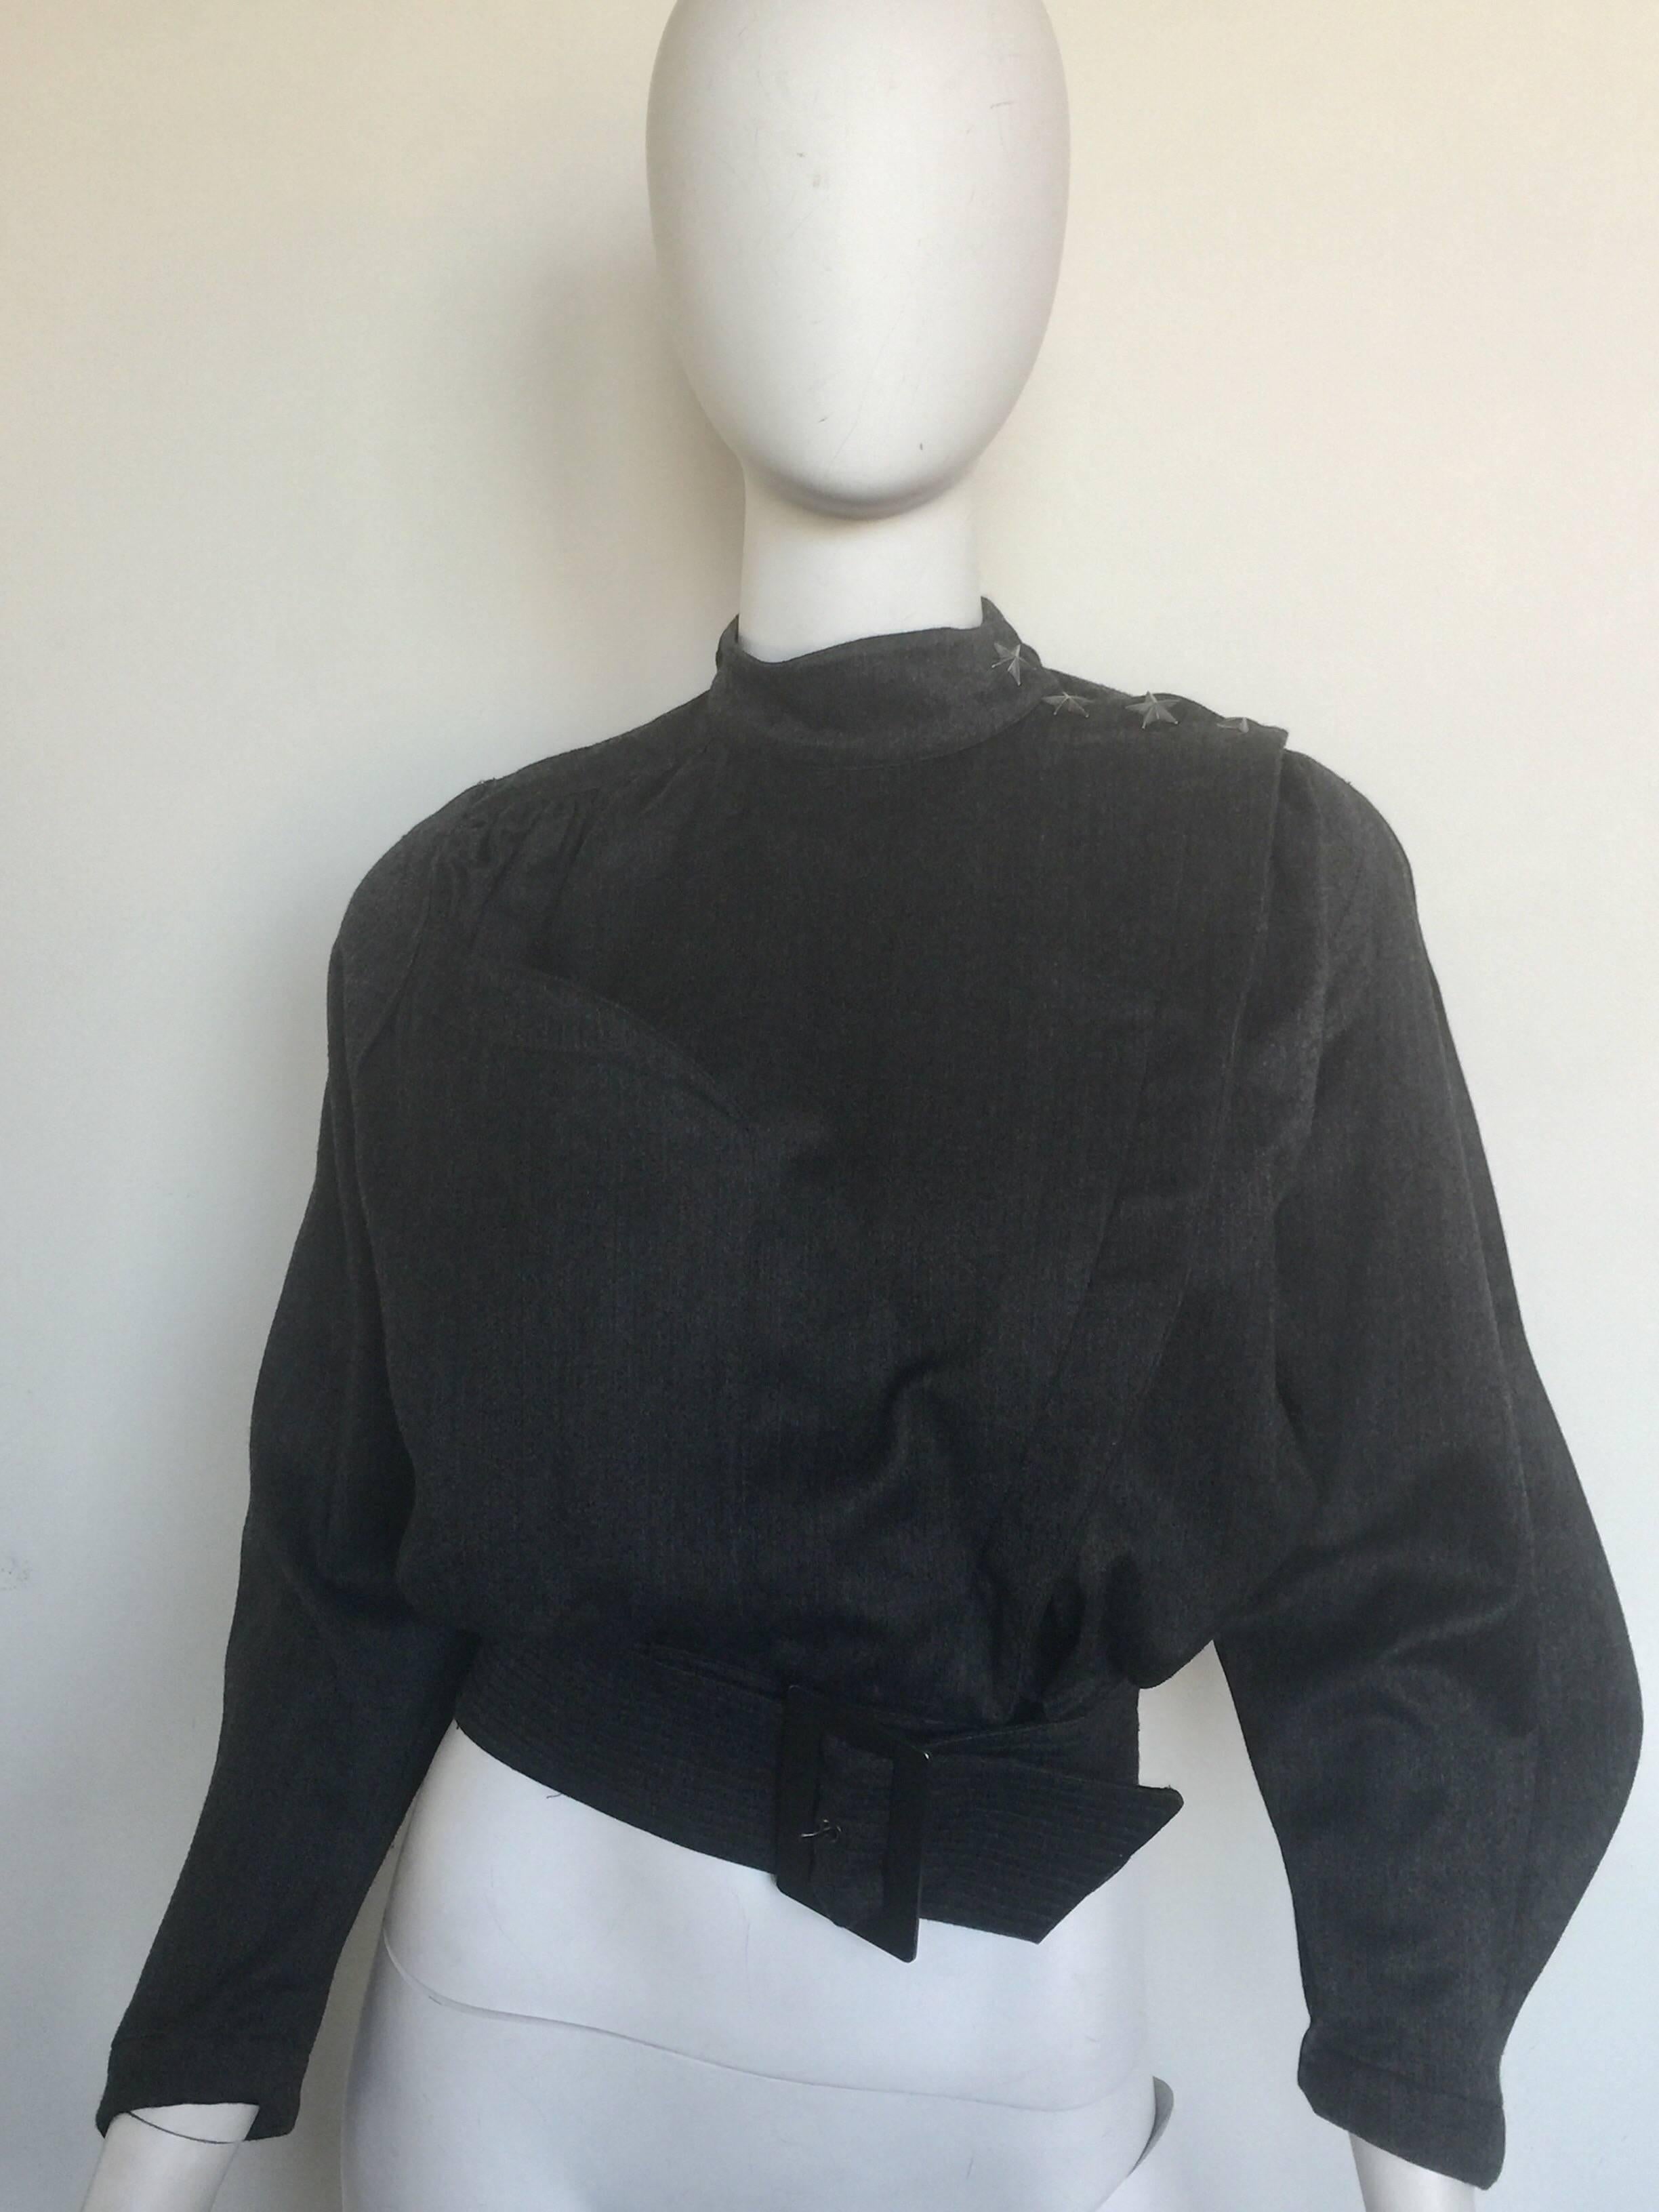 This 1980s cropped Thierry bugler jacket is a charcoal grey.  it has silver star buttons on the right shoulder and a signature bugler waist belt.  It looks great closed or worn open.